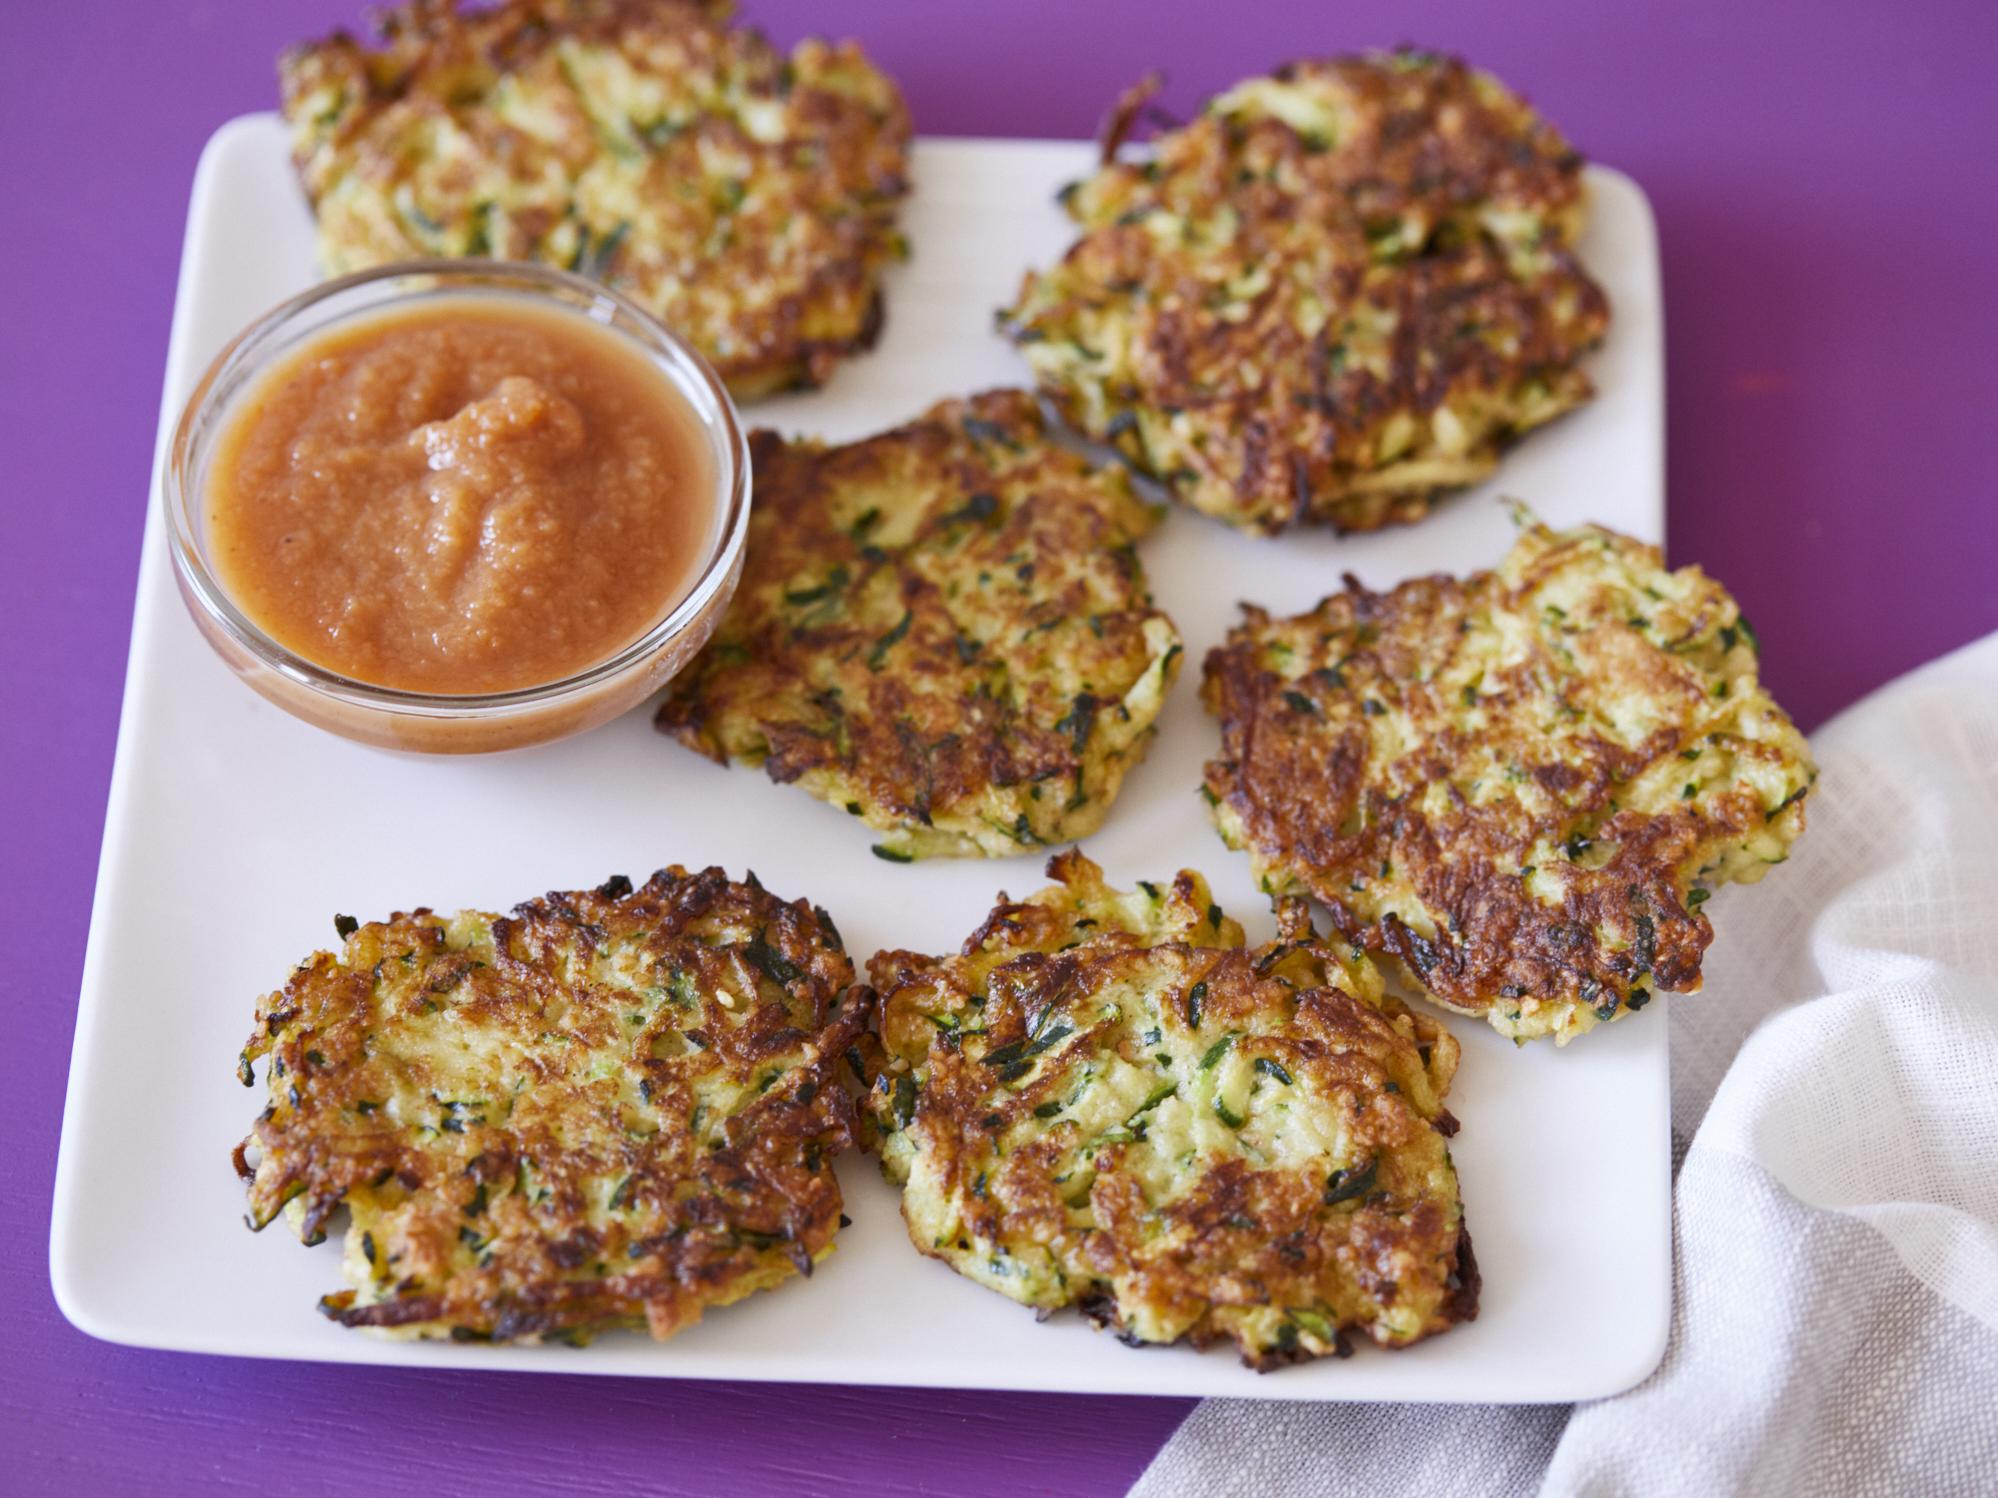  These Zucchini latkes make a delicious, healthy snack or a unique appetizer.